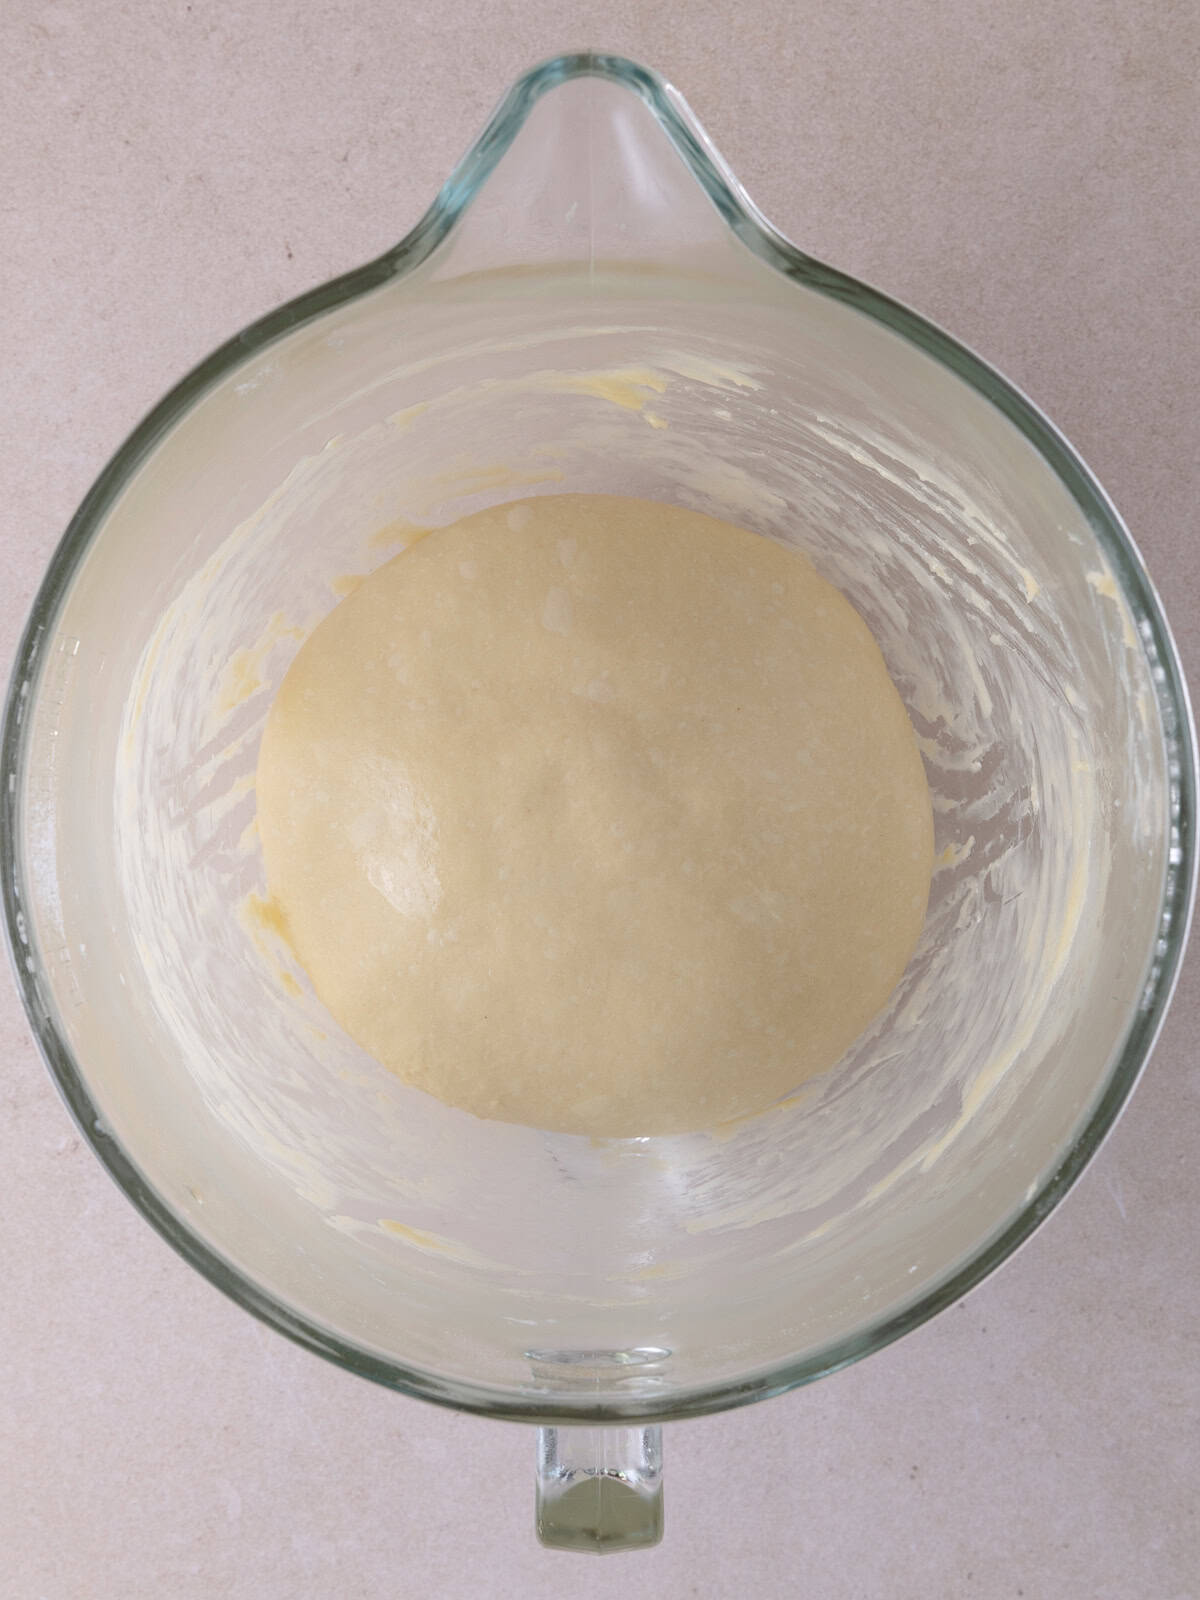 Dough has been formed into a smooth ball and placed in an oiled bowl and ready for the first rise.